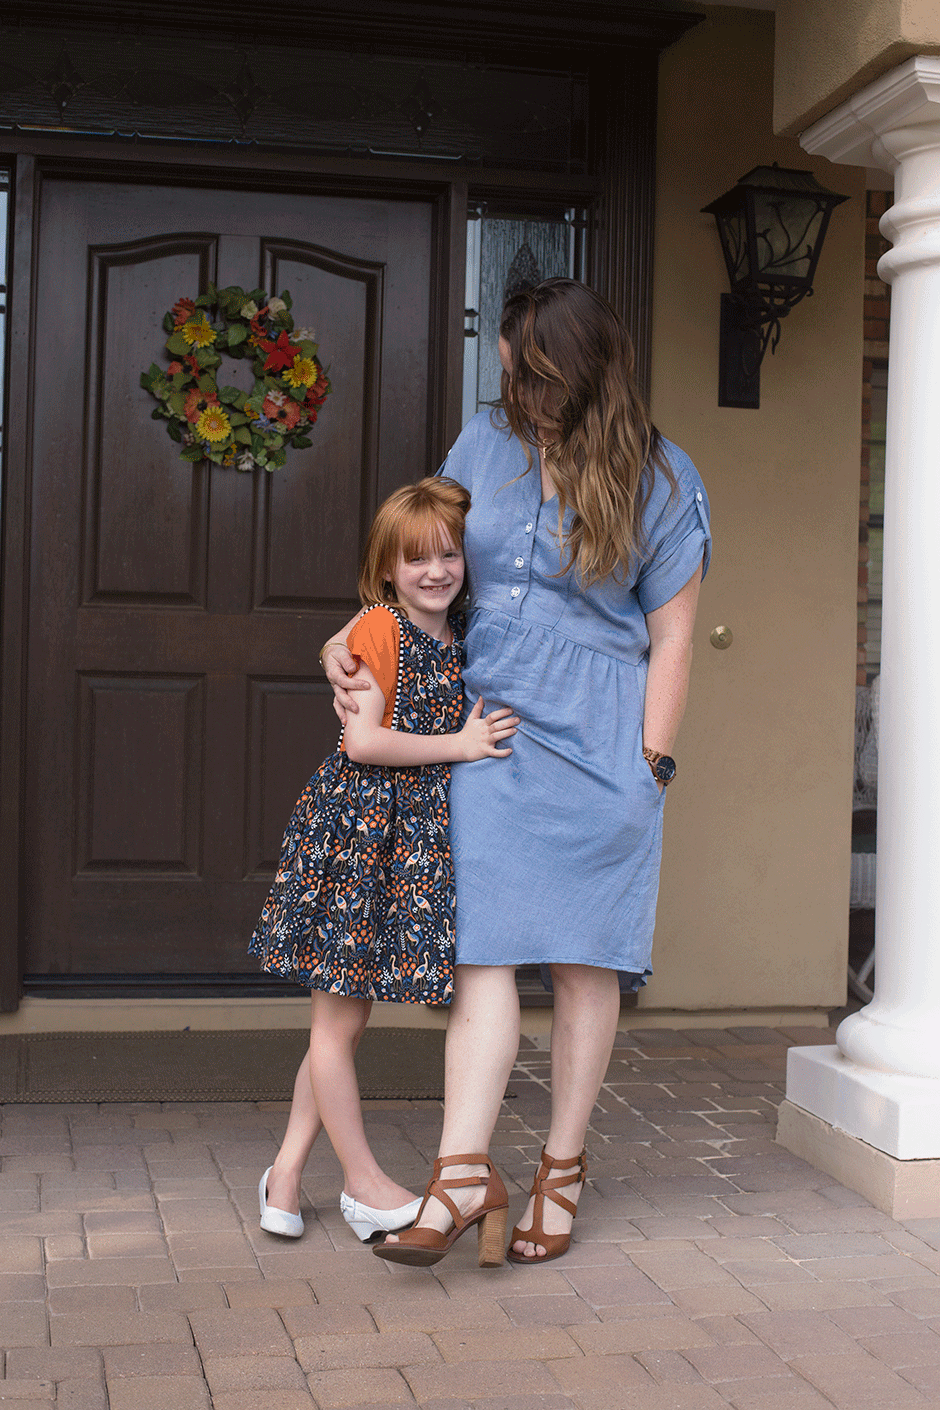 Whipping up a few warm weather dresses is the perfect welcome to a long overdue spring! These two dress patterns (one for girls and one for women) are surefire beginner favorites that will stand the test of time, and both are a breeze to sew. They both use woven fabrics which are easy to work with and widely available in super cute prints. Check out some inspiration below and get yourself started sewing spring dresses!